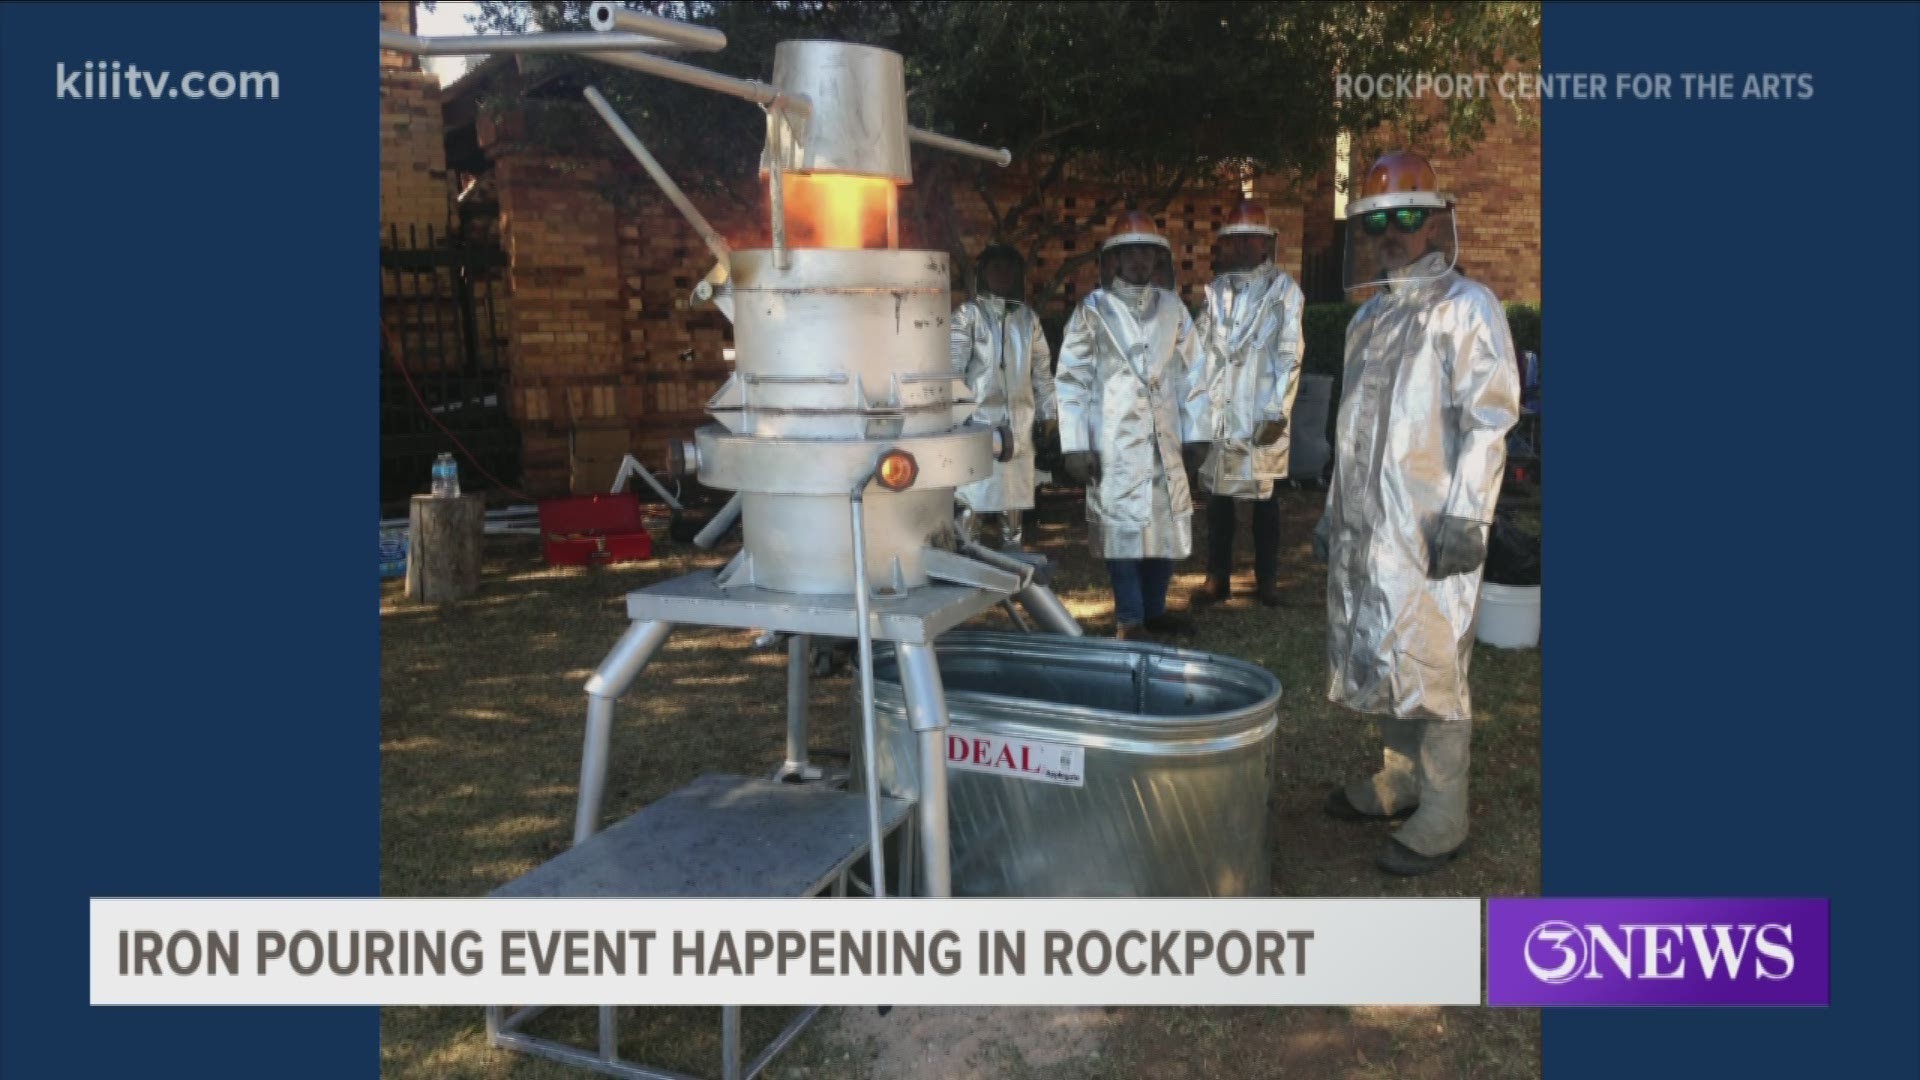 The Rockport Center for the Arts invites residents to the Rockport Arts on Fire: Iron Pour.